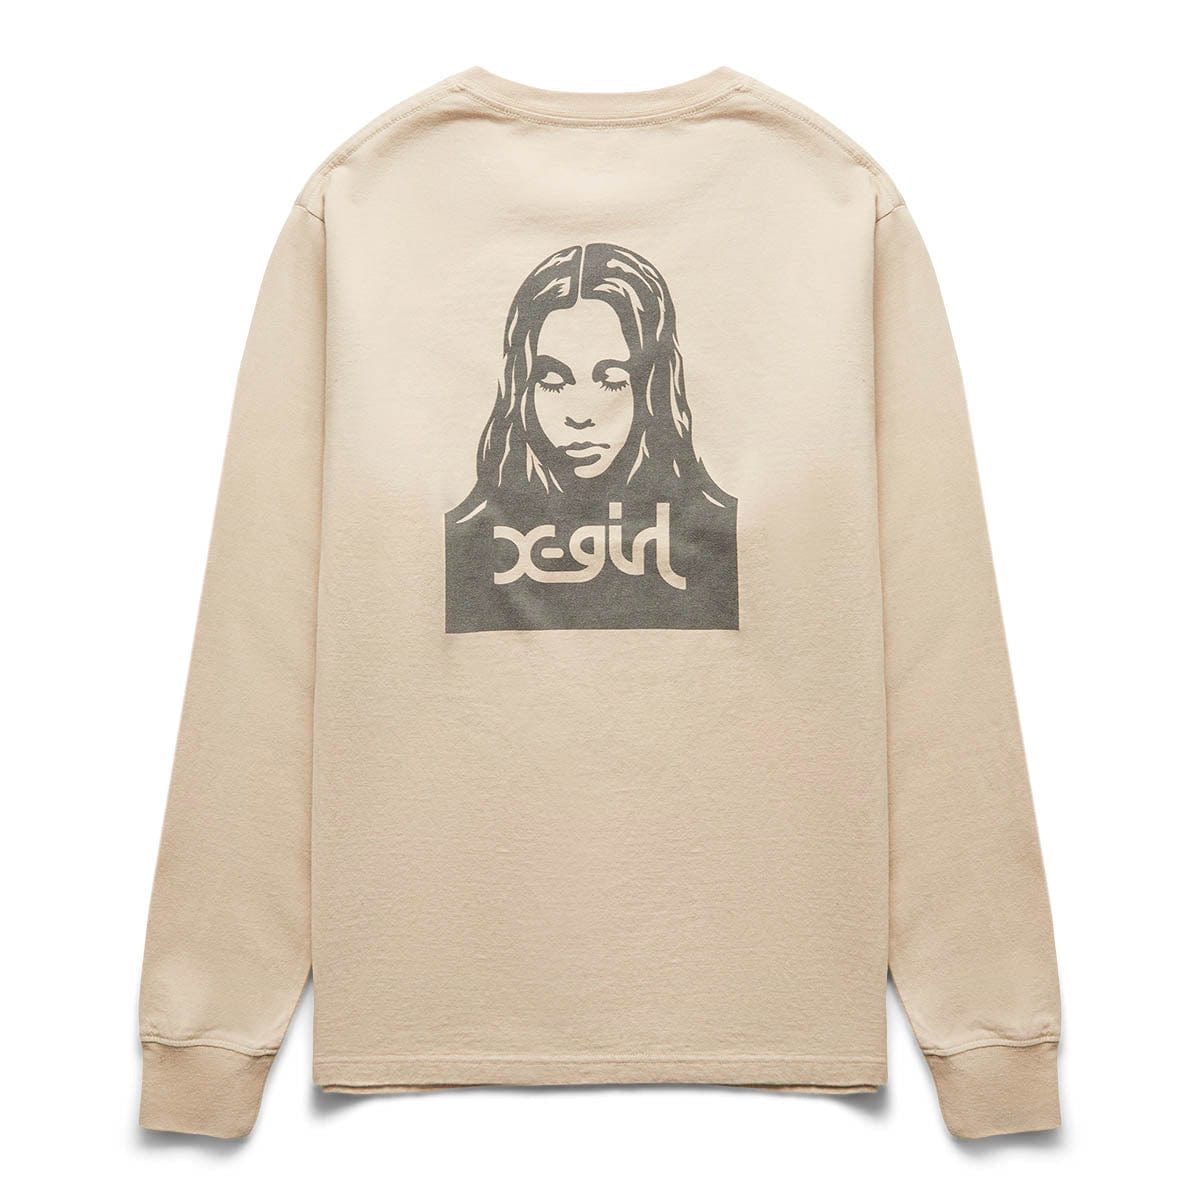 X-Girl Womens WASHED FACE LOGO L/S TEE